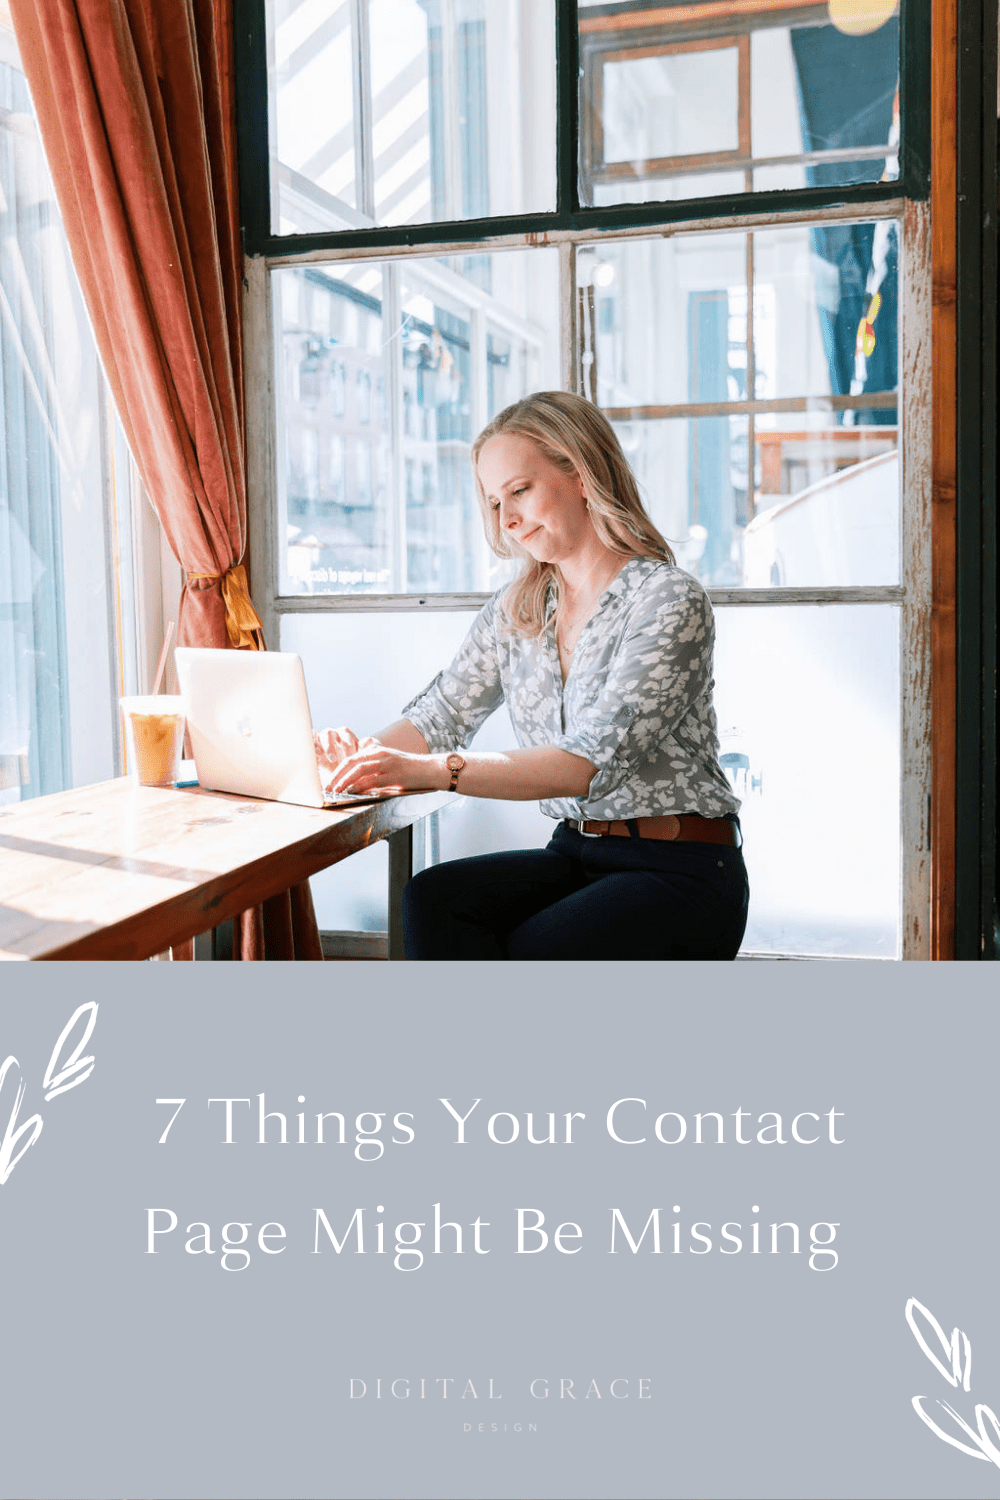 7 Things Your Contact Page Might Be Missing